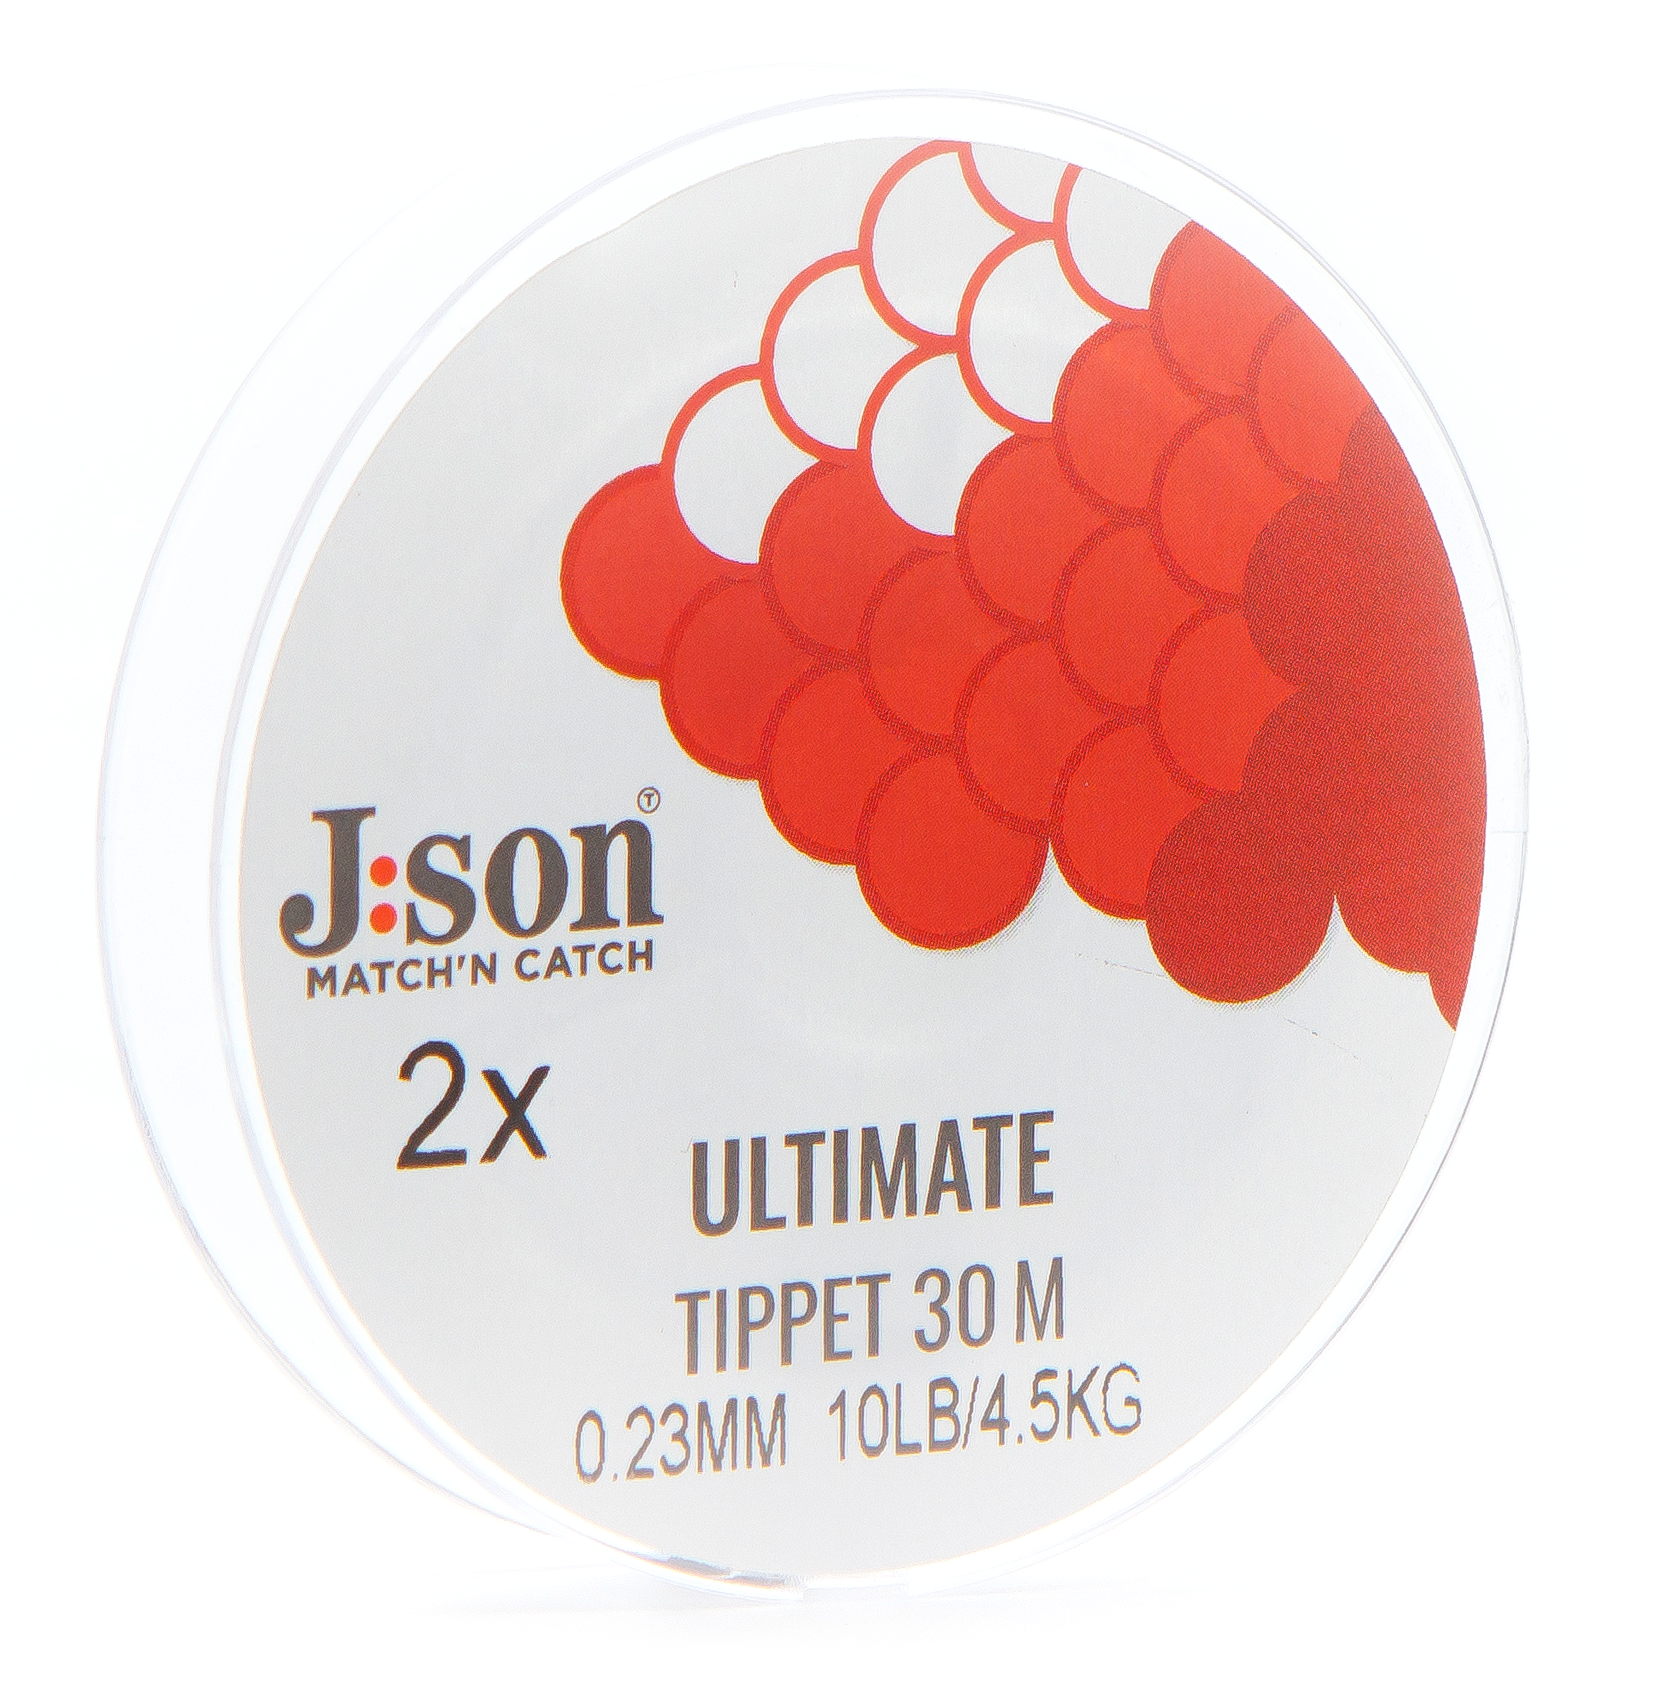 Json Ultimate Tippet 30 m 3X 0.20mm